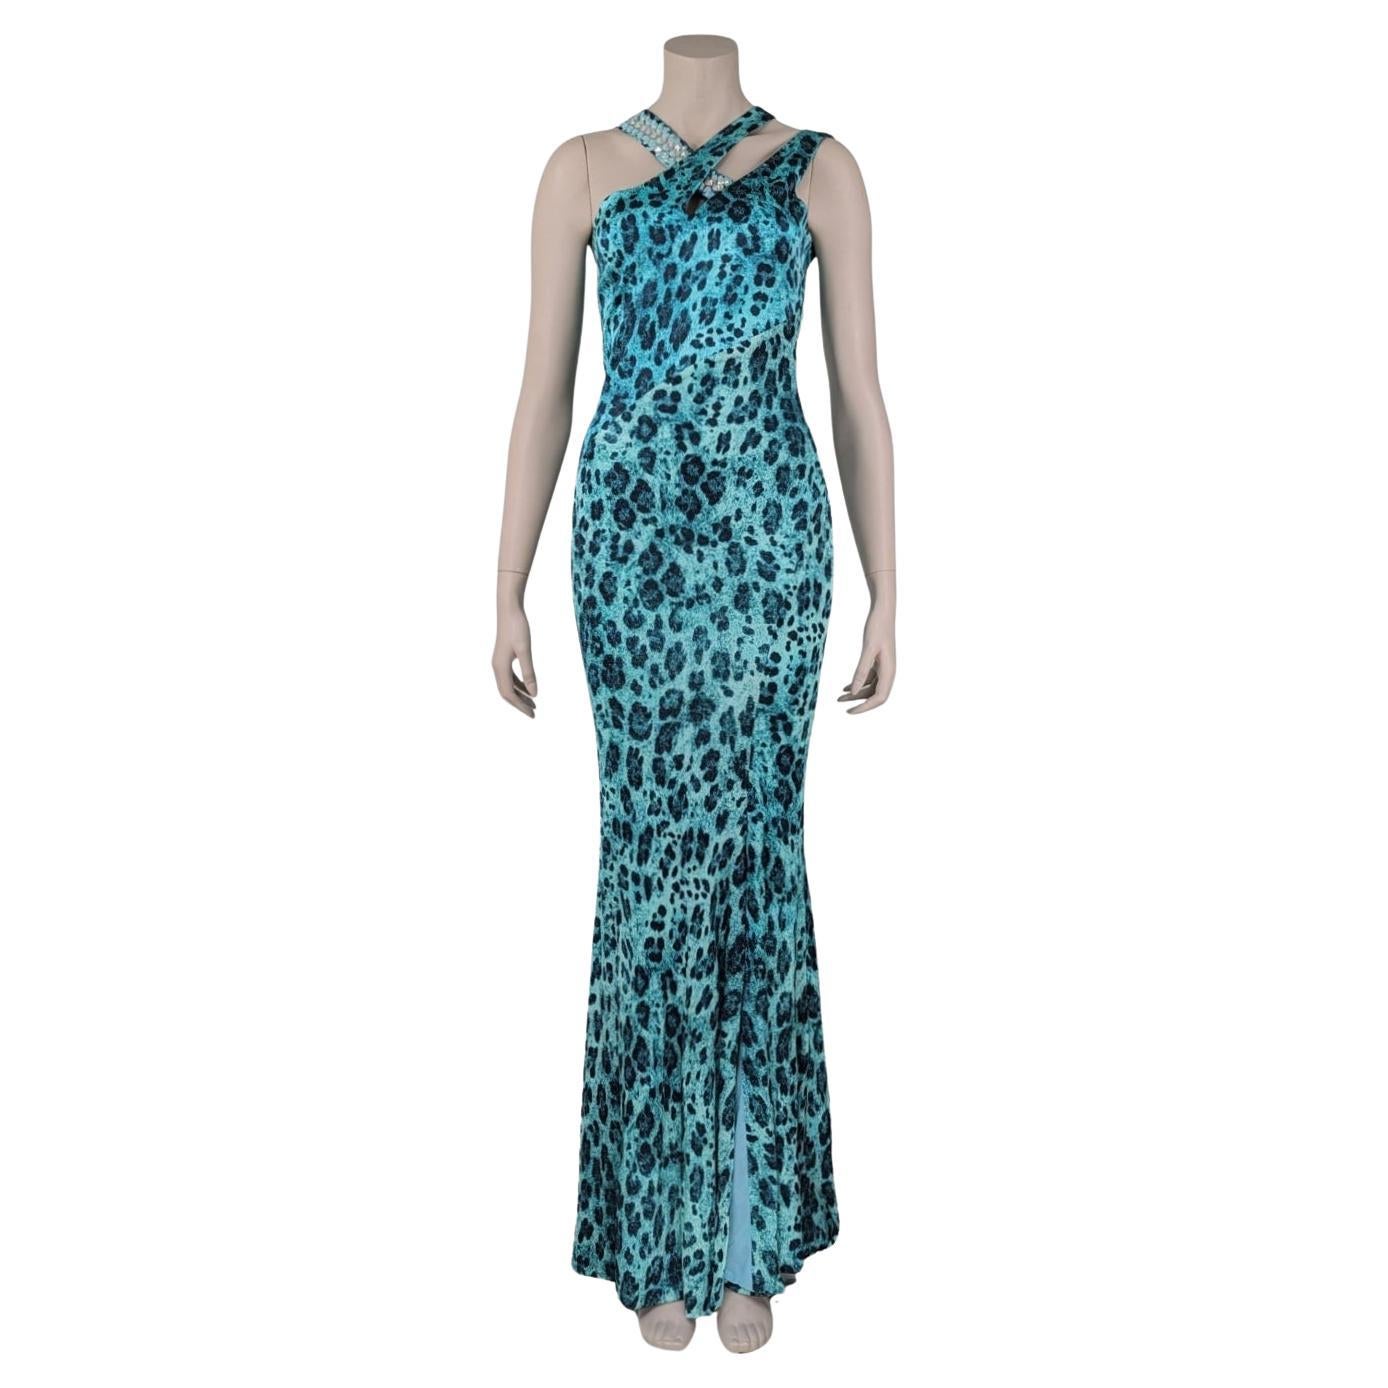 Animal print all-over maxi dress from the Fall 2012 Collection For Sale